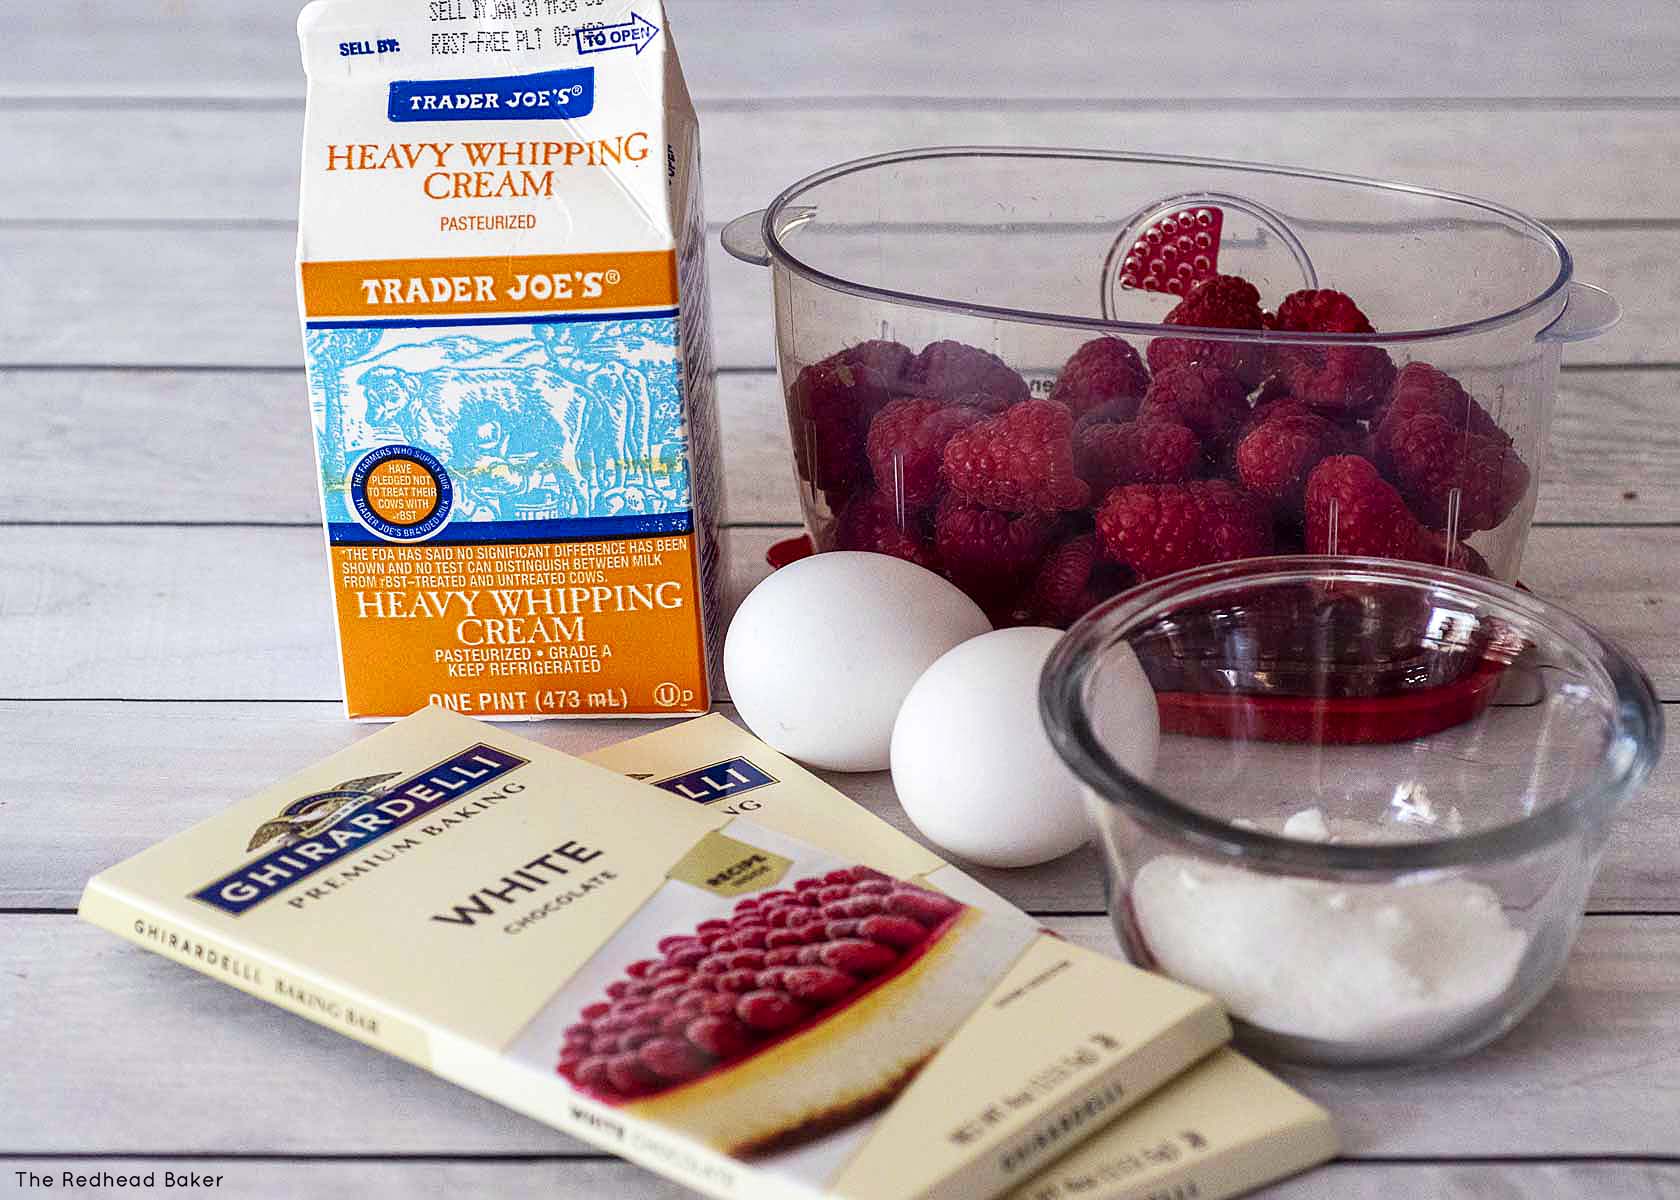 Ingredients for white chocolate mousse: cream, raspberries, sugar, eggs and white chocolate.